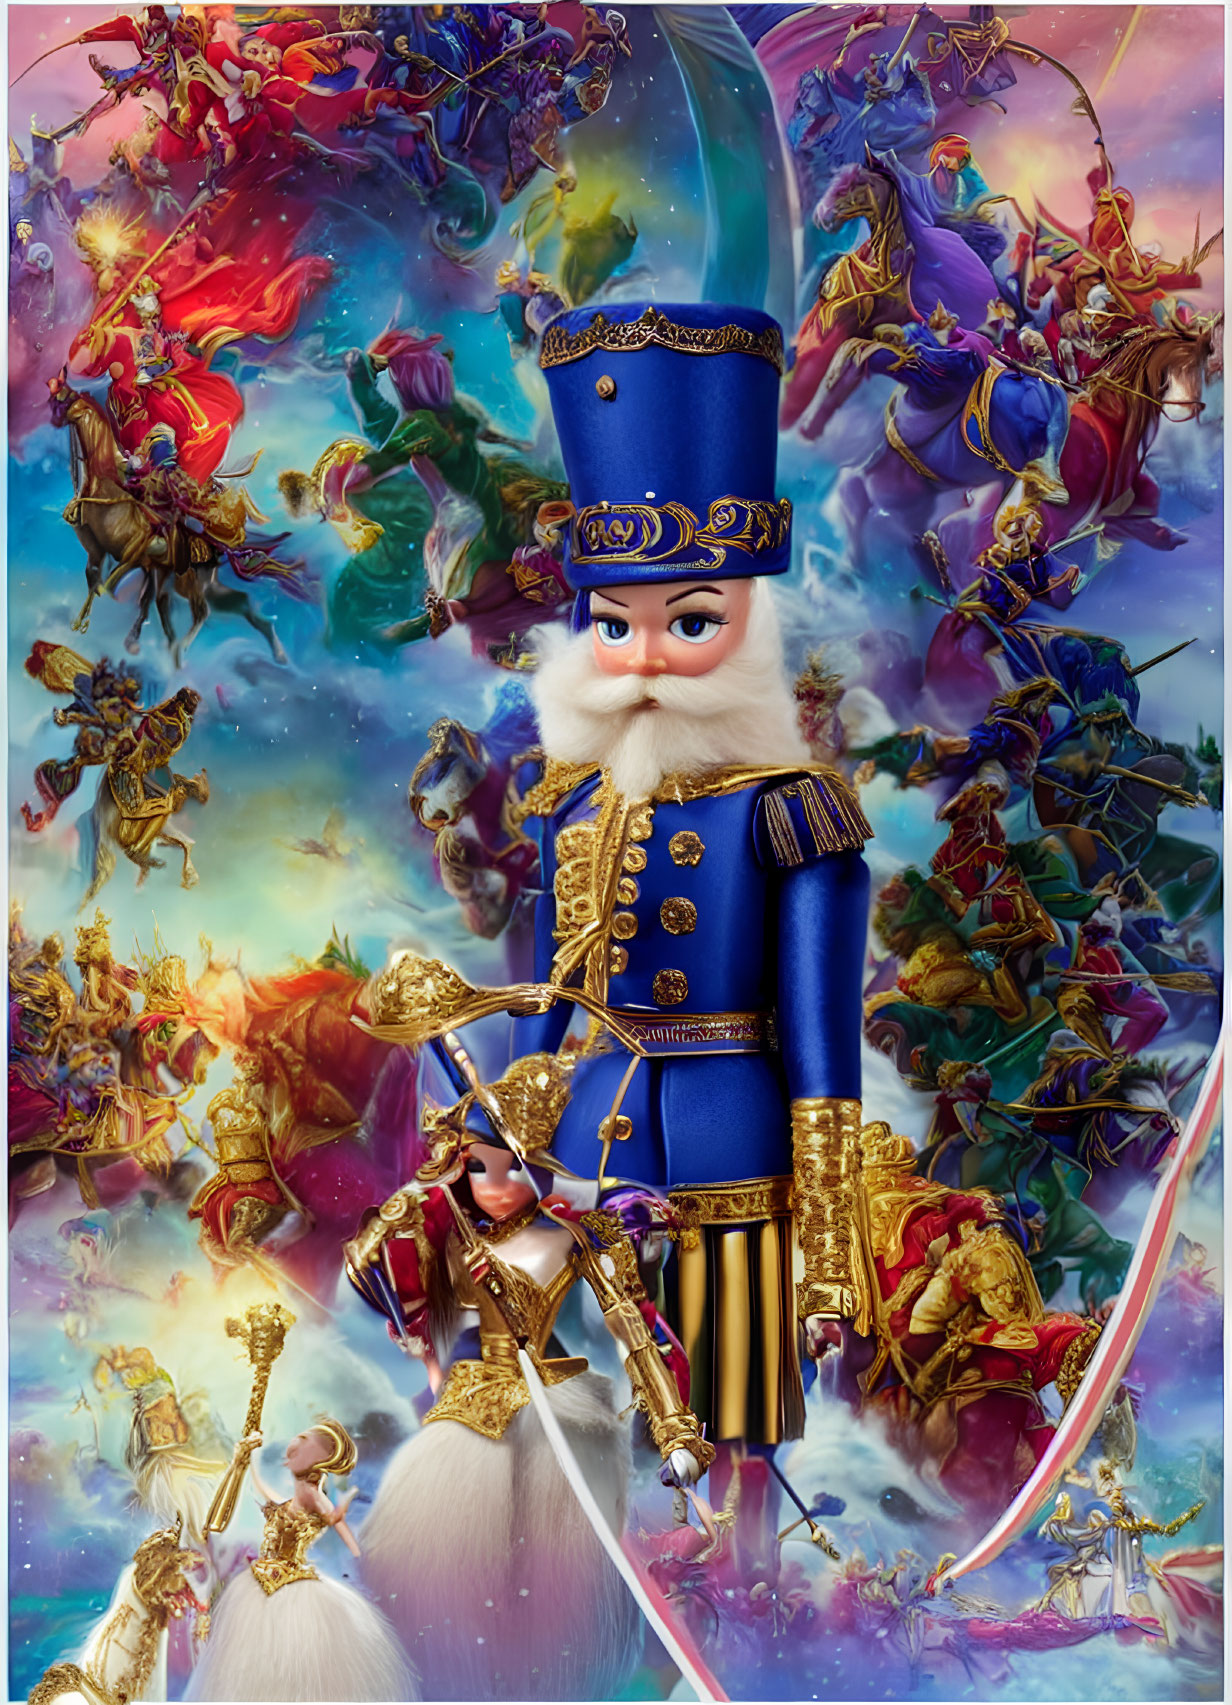 Colorful Nutcracker Figure Surrounded by Fantasy Warriors on Flying Horses